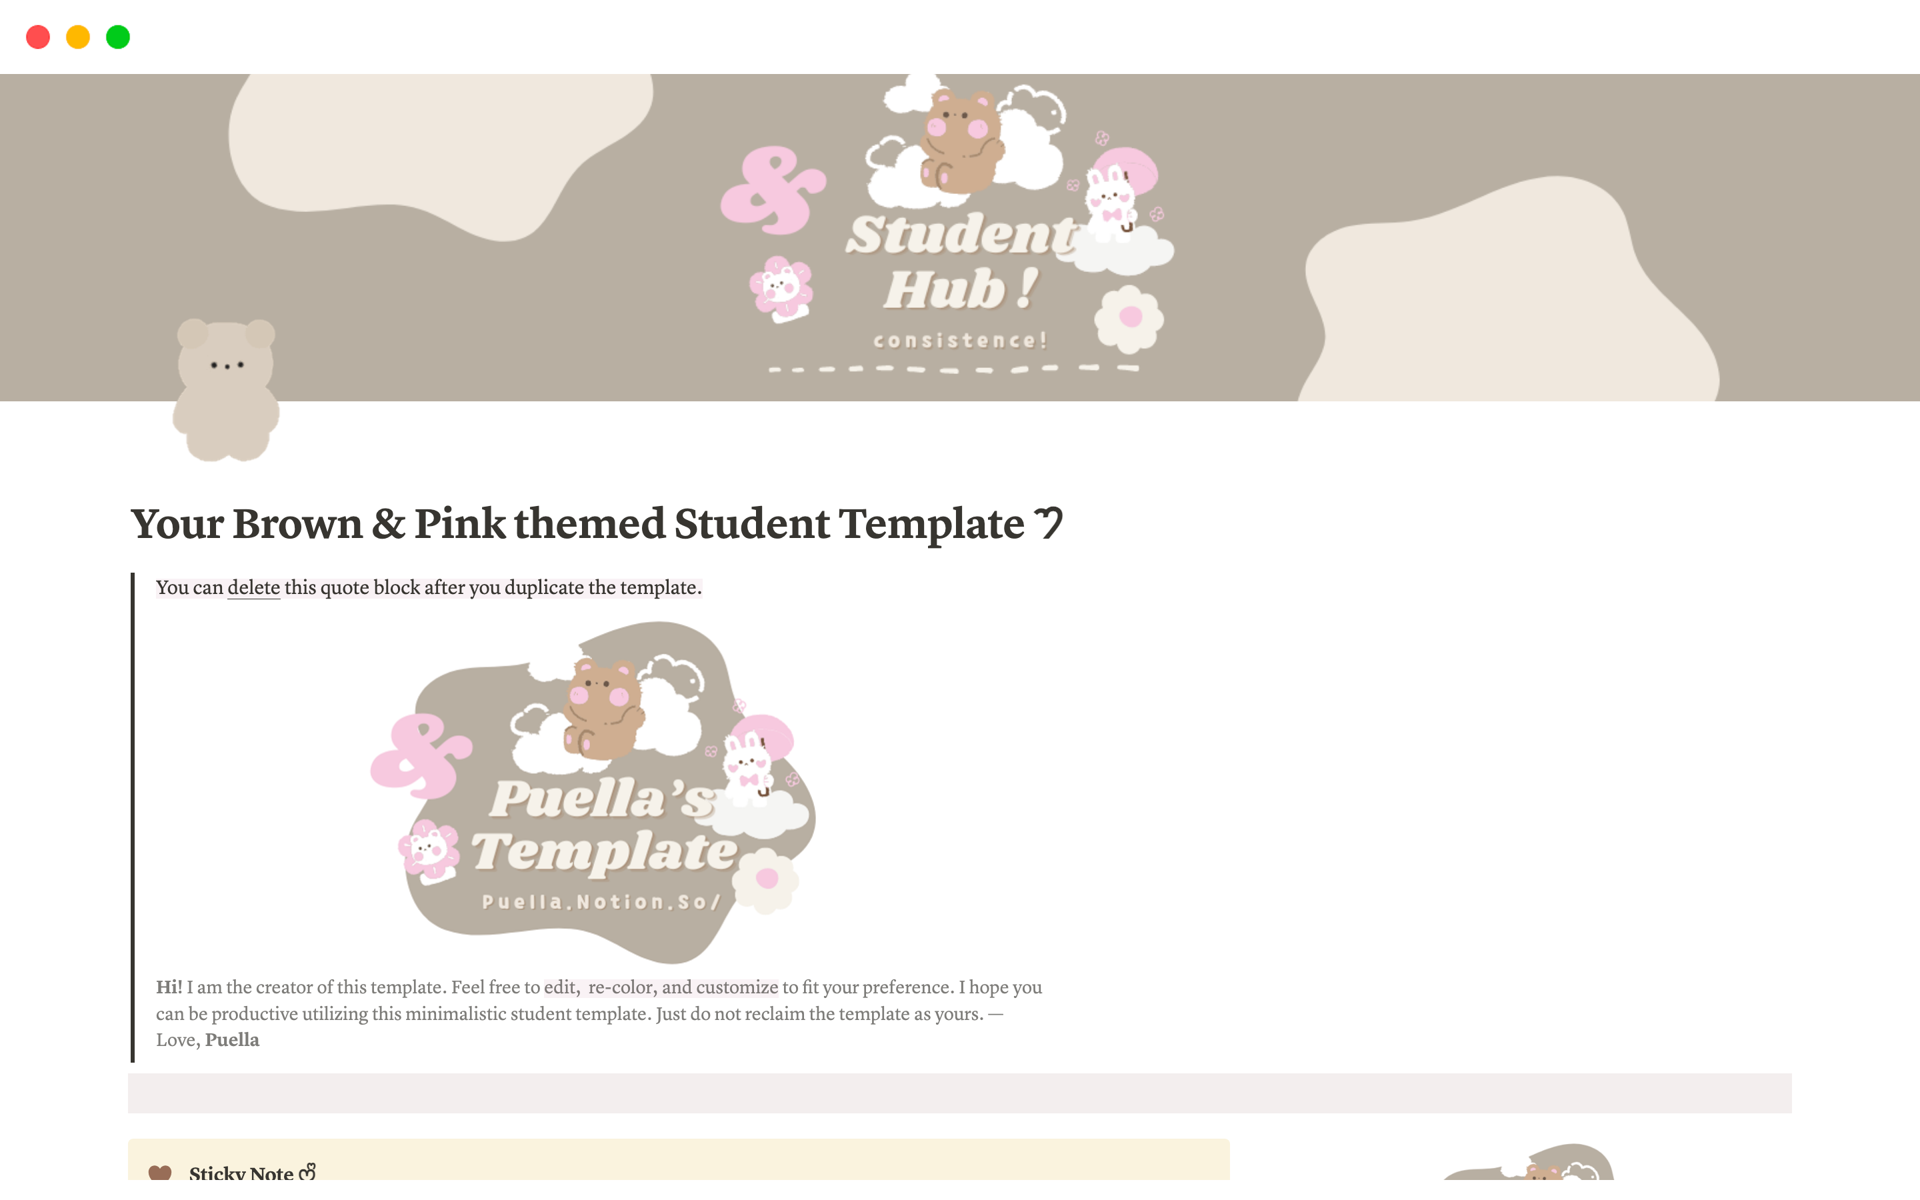 A template preview for Brown & Pink themed Student Template